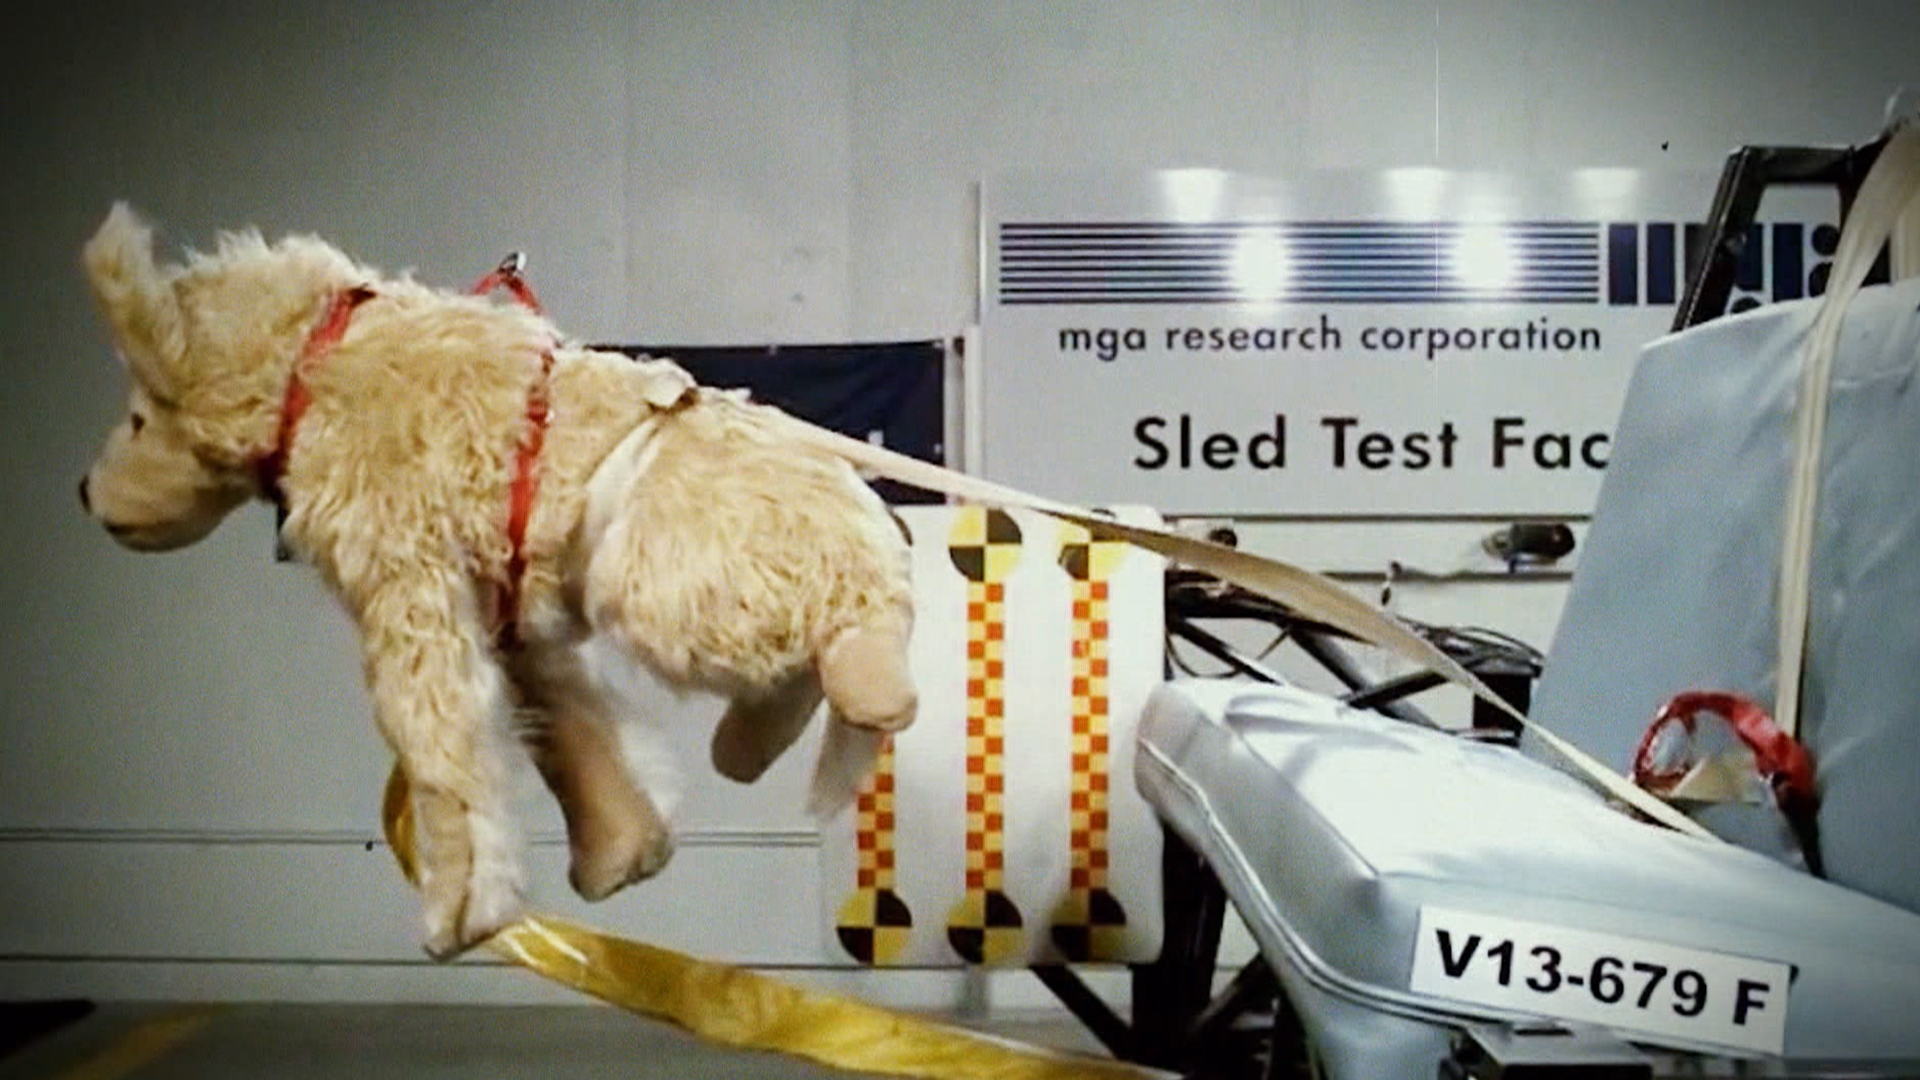 Most safety restraints for pets in cars fail crash tests - TODAY.com1920 x 1080